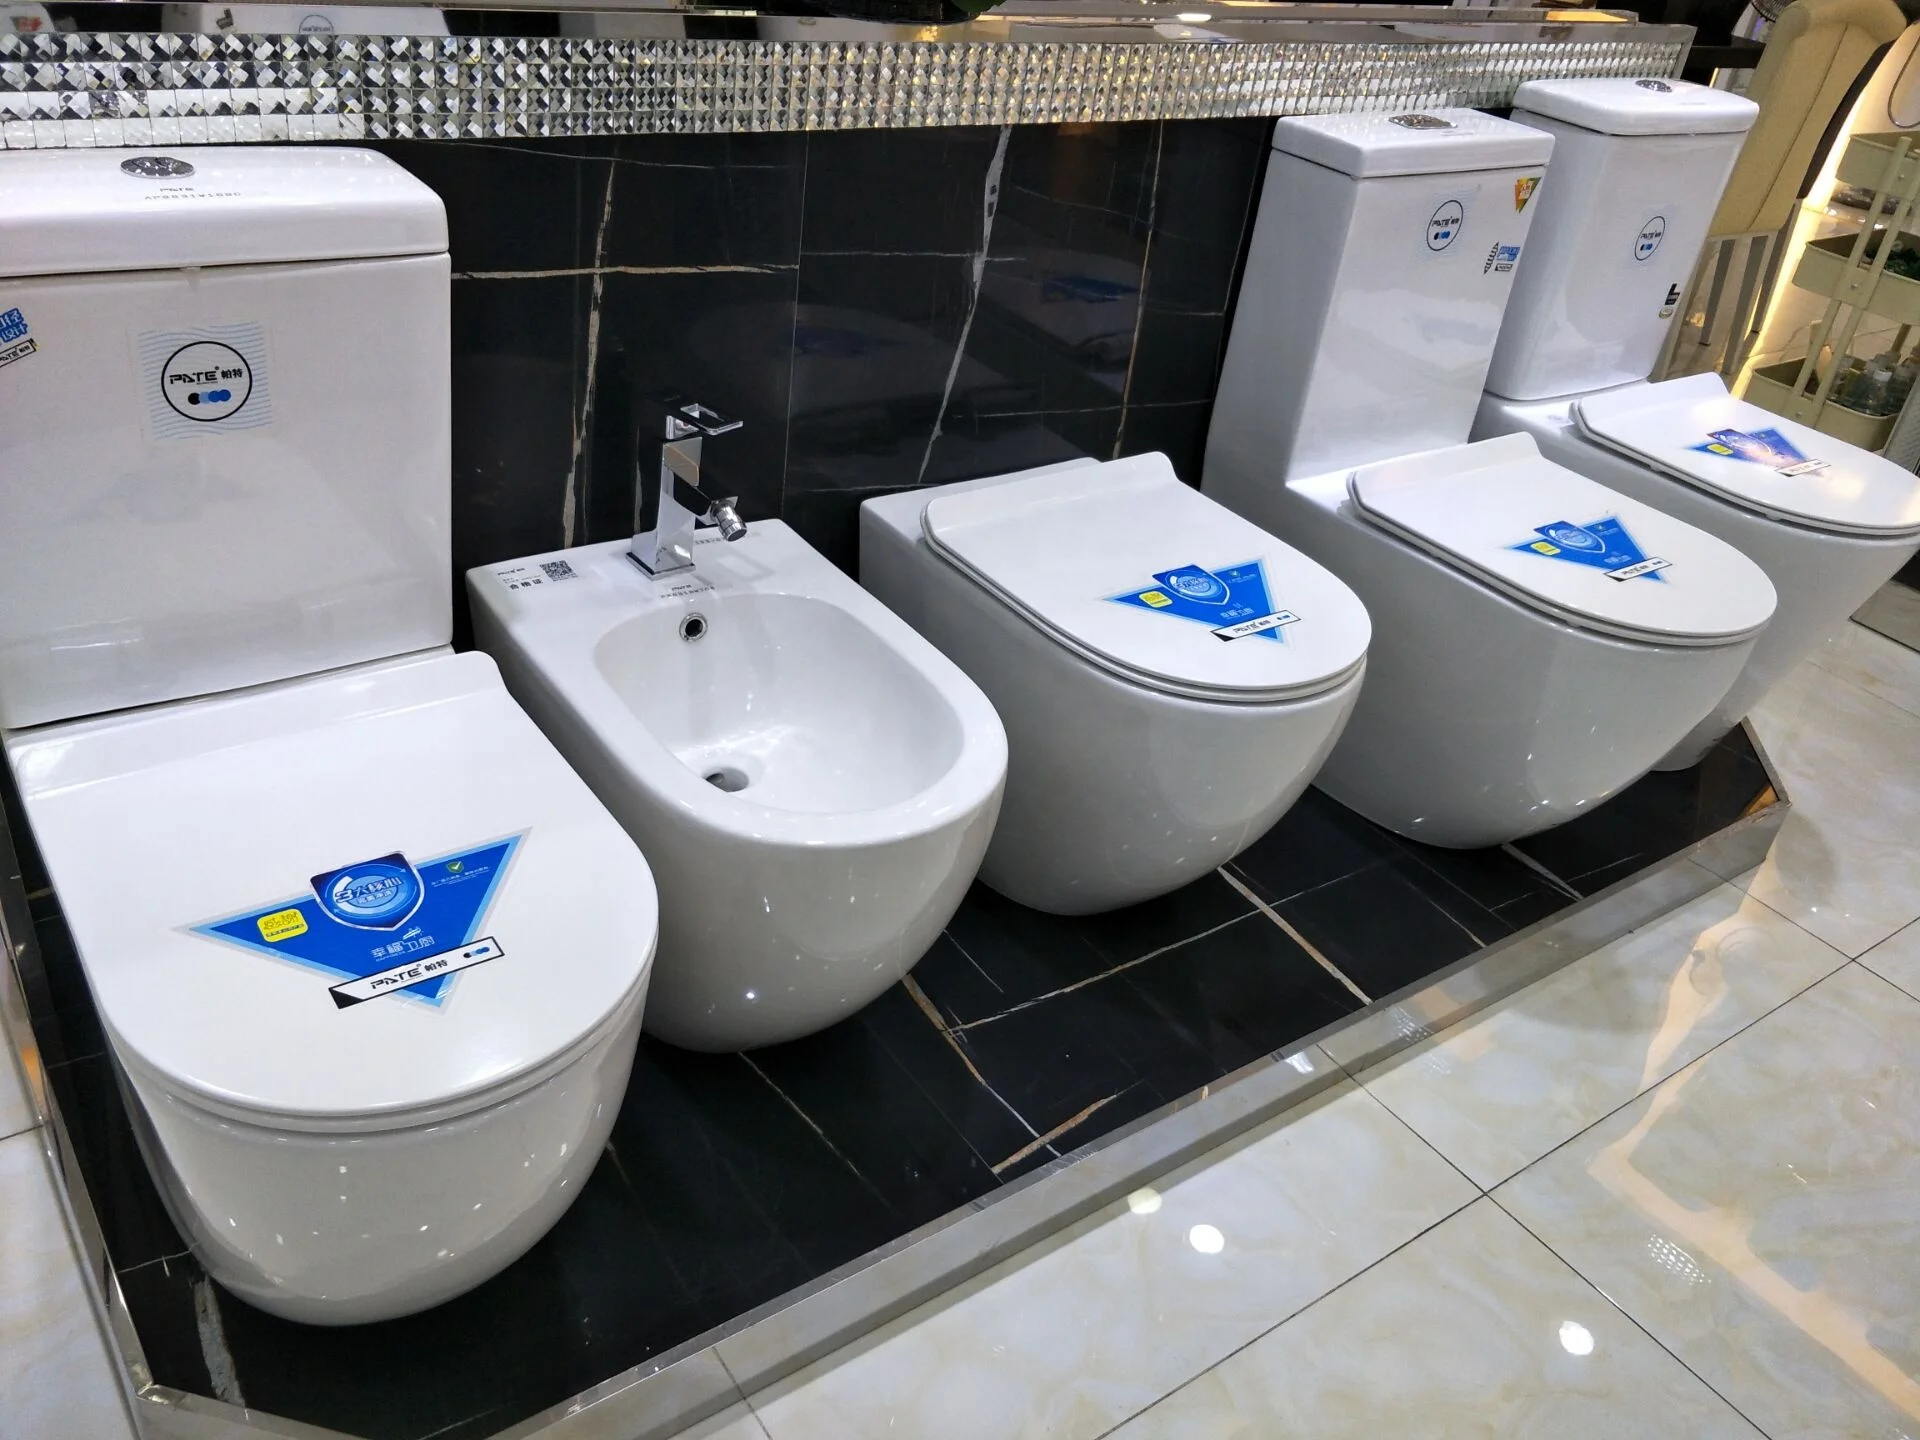 New bathroom water closet ceramic washdown p-trap water saving back to wall toilet with toilet seat for UK market